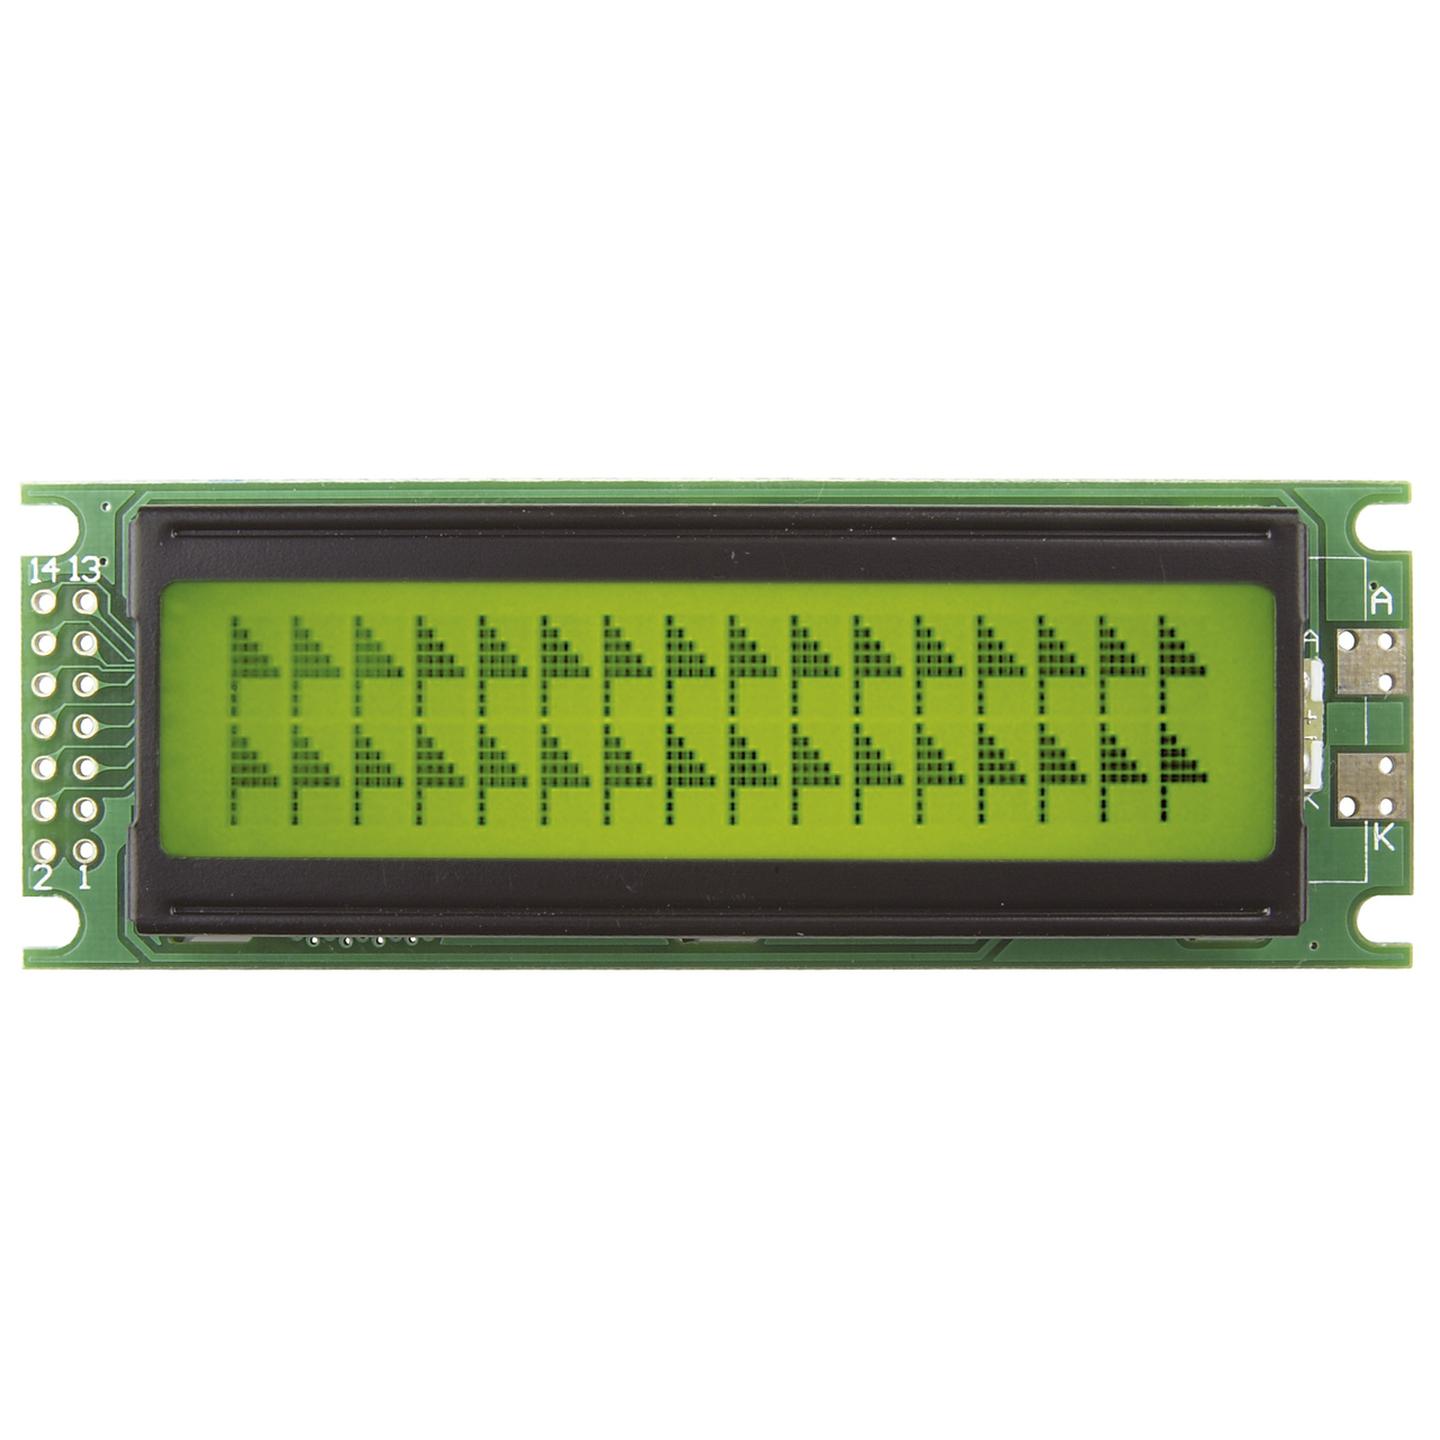 LCD Panel 2 Line 16 Character with Backlight - Wide Angle Viewing